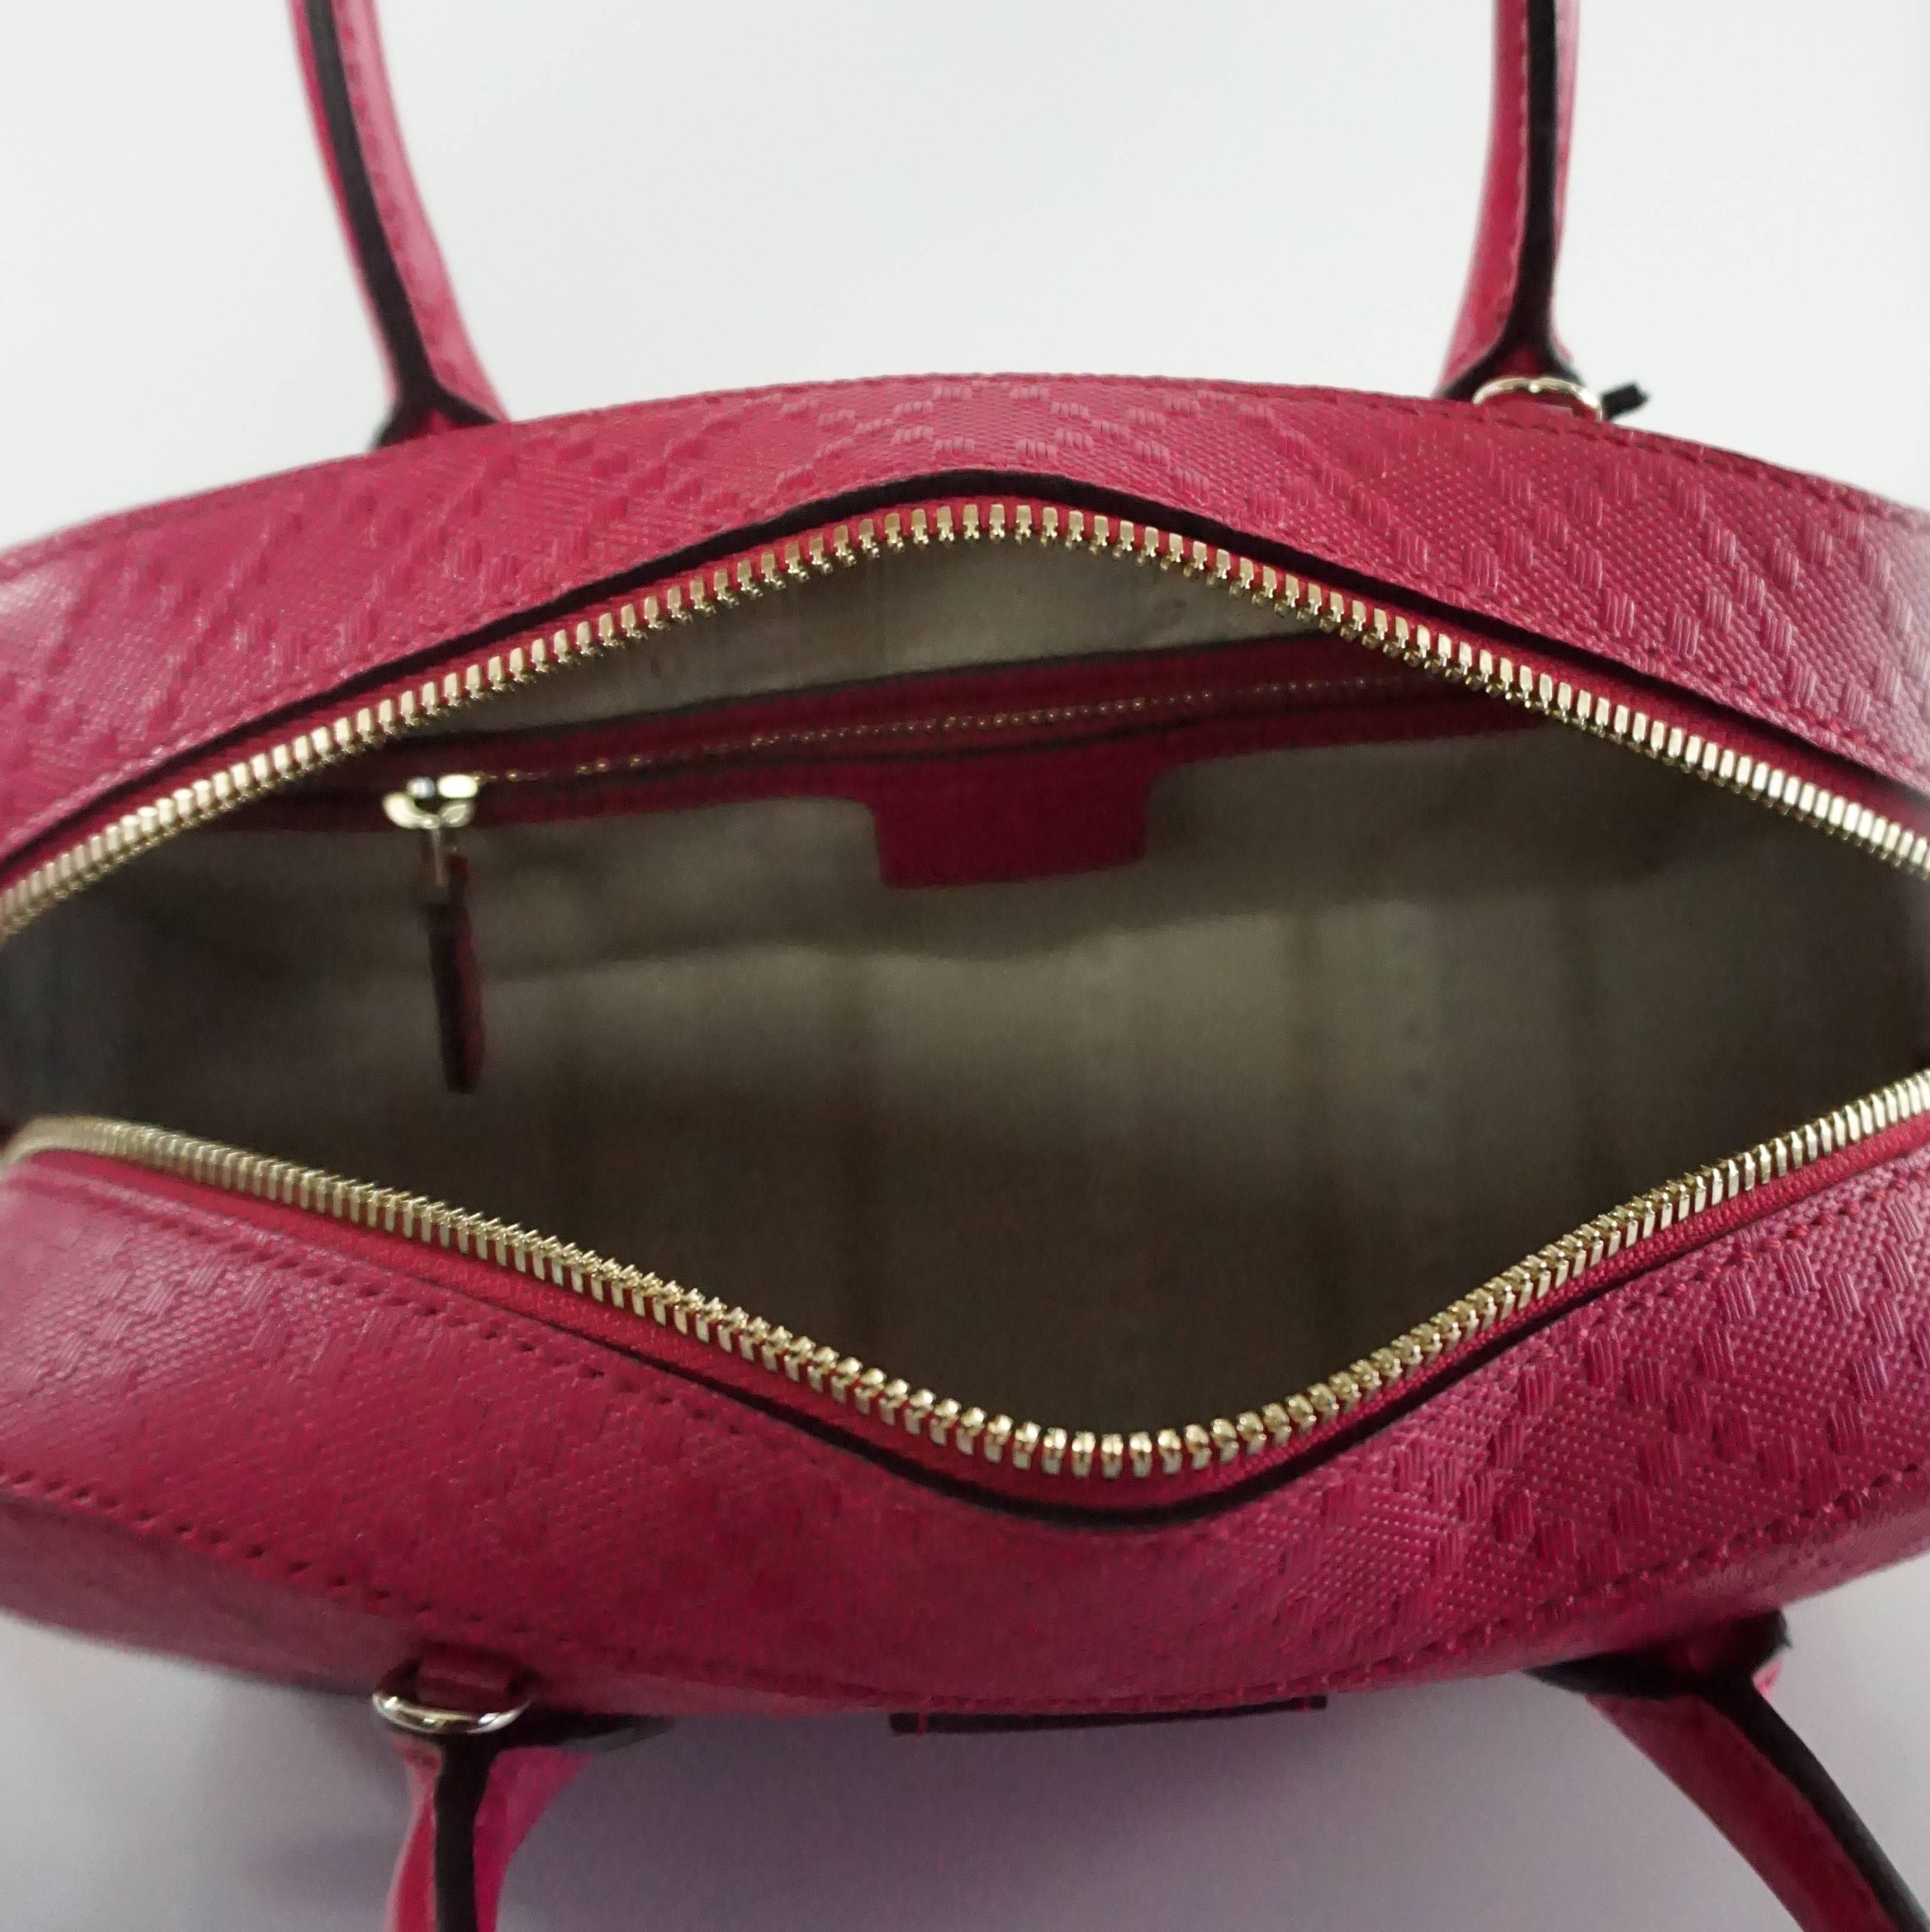 Women's New Gucci Pink Diamante Top Handle Bag with Strap - 2015